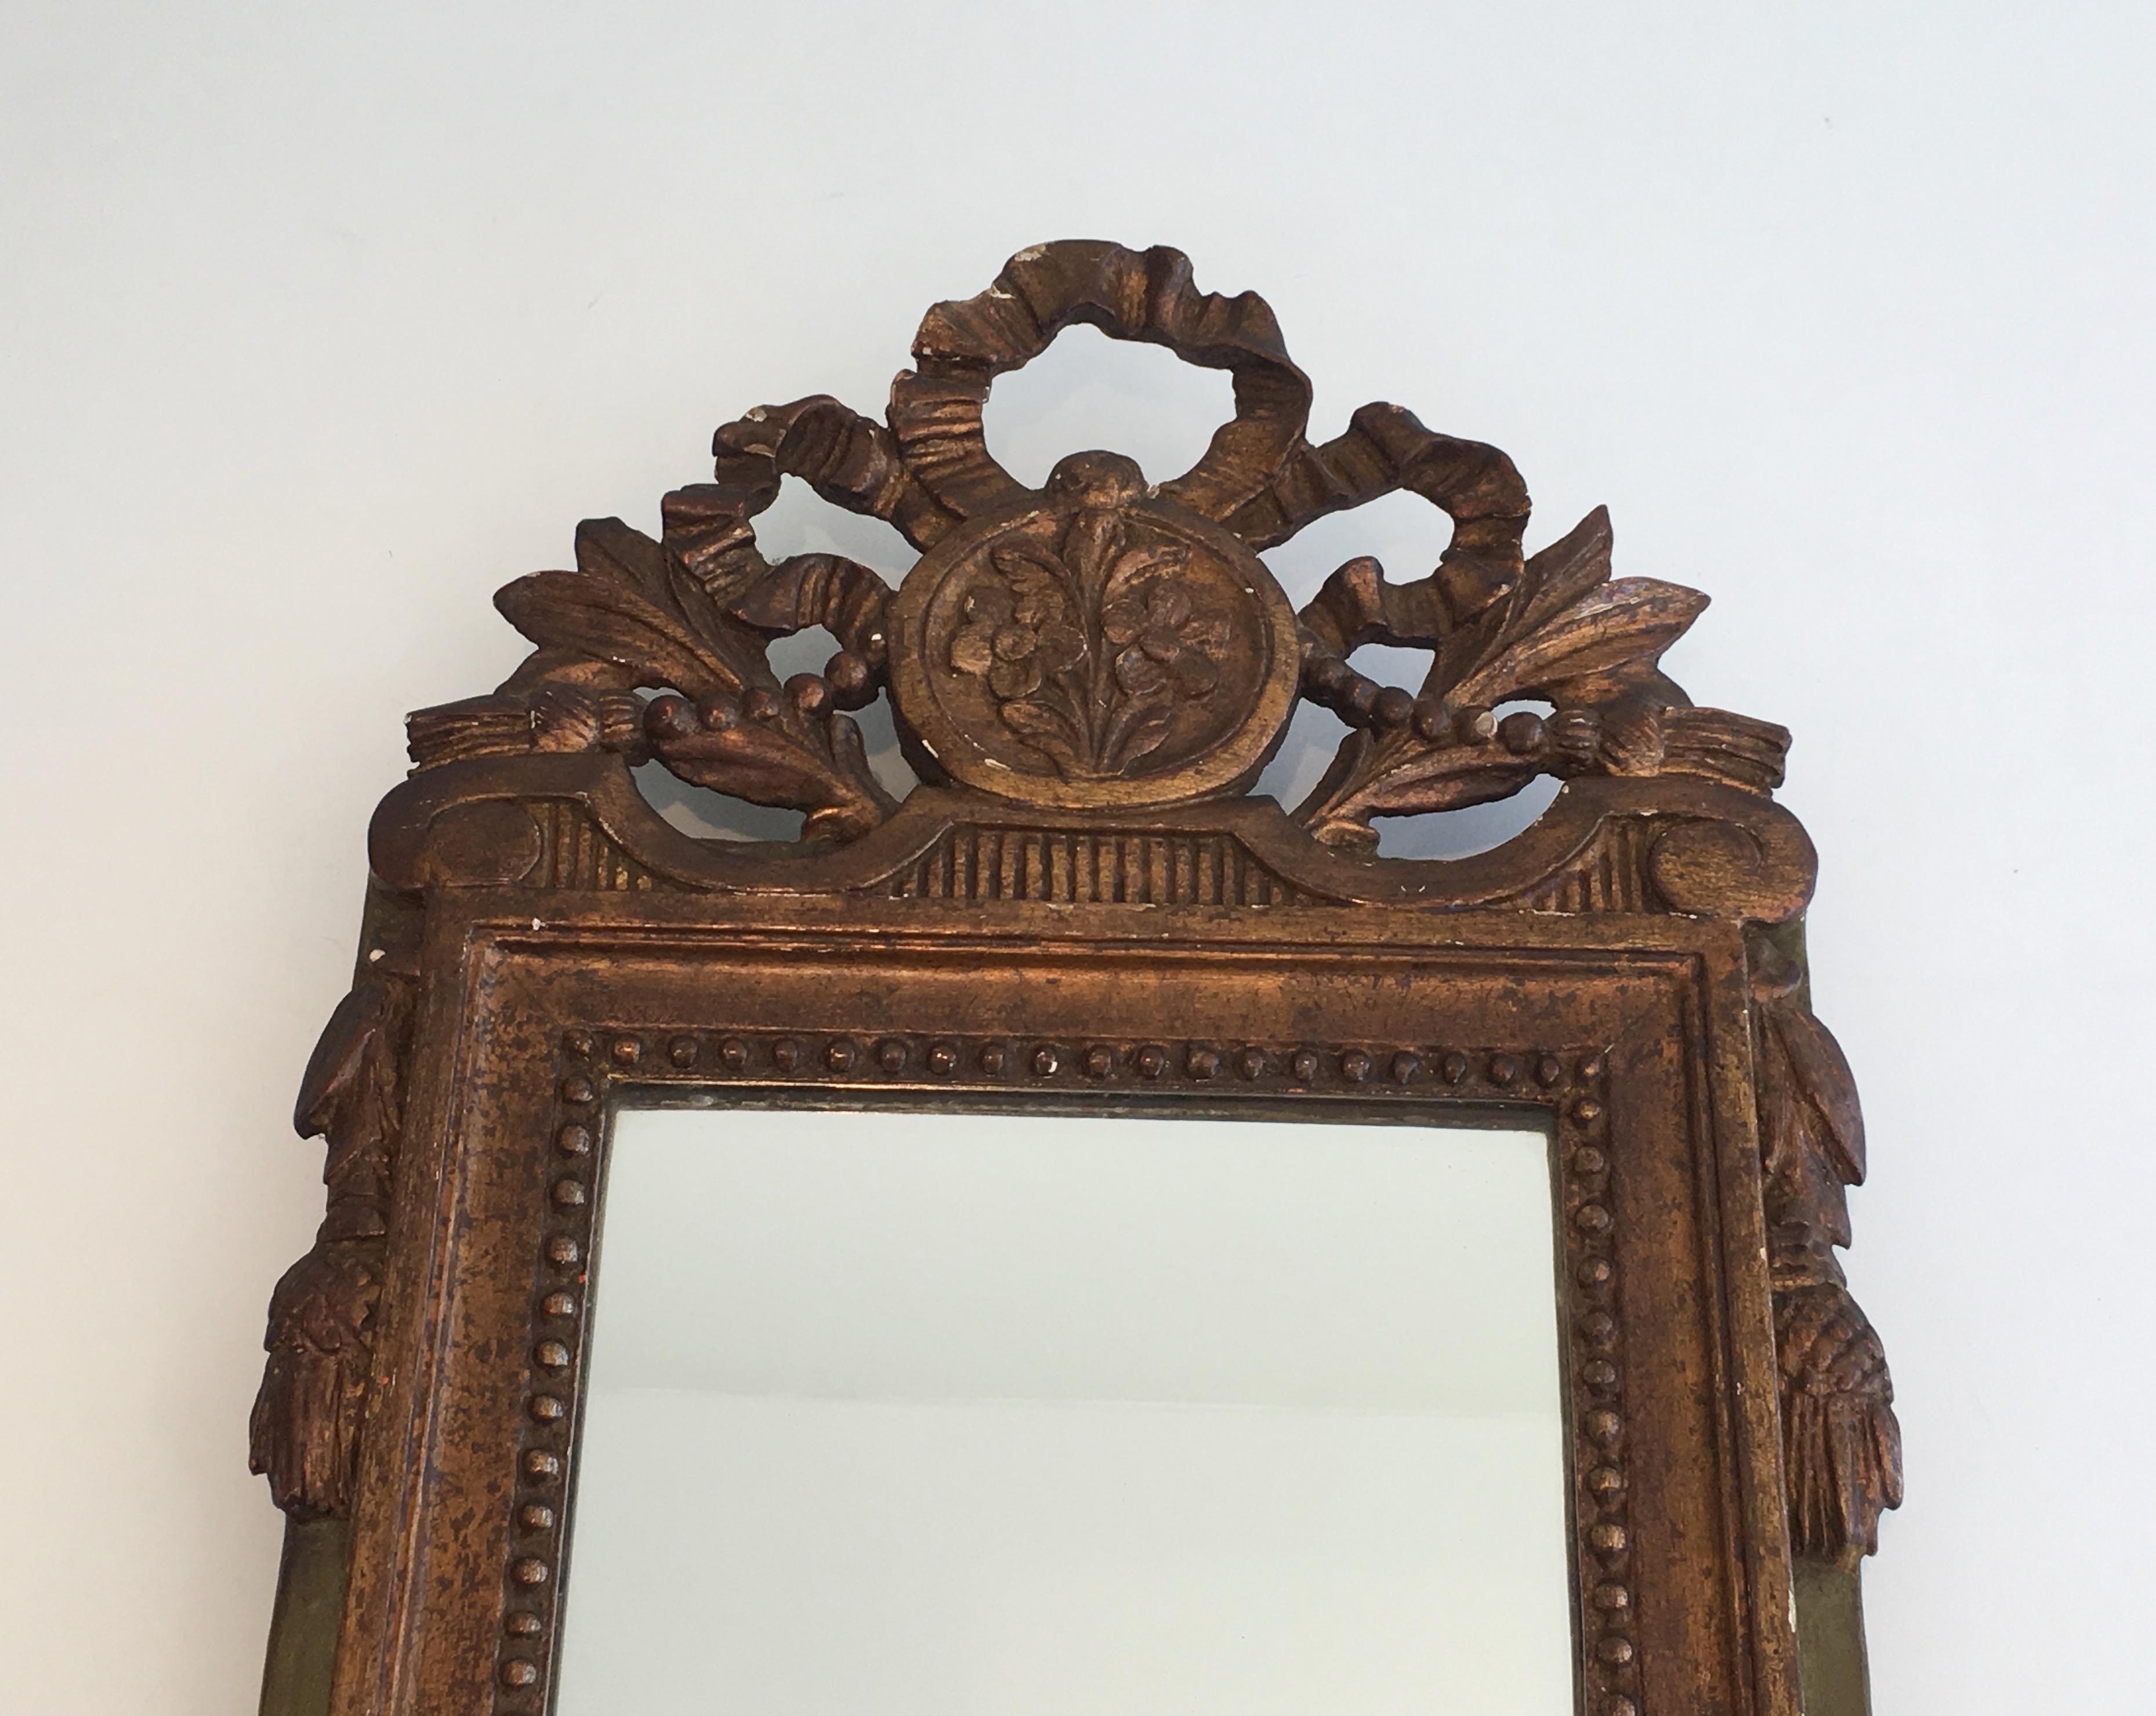 Louis the xvi Style Gilt and Painted Wood Mirror, French, 19th Century In Good Condition For Sale In Marcq-en-Barœul, Hauts-de-France